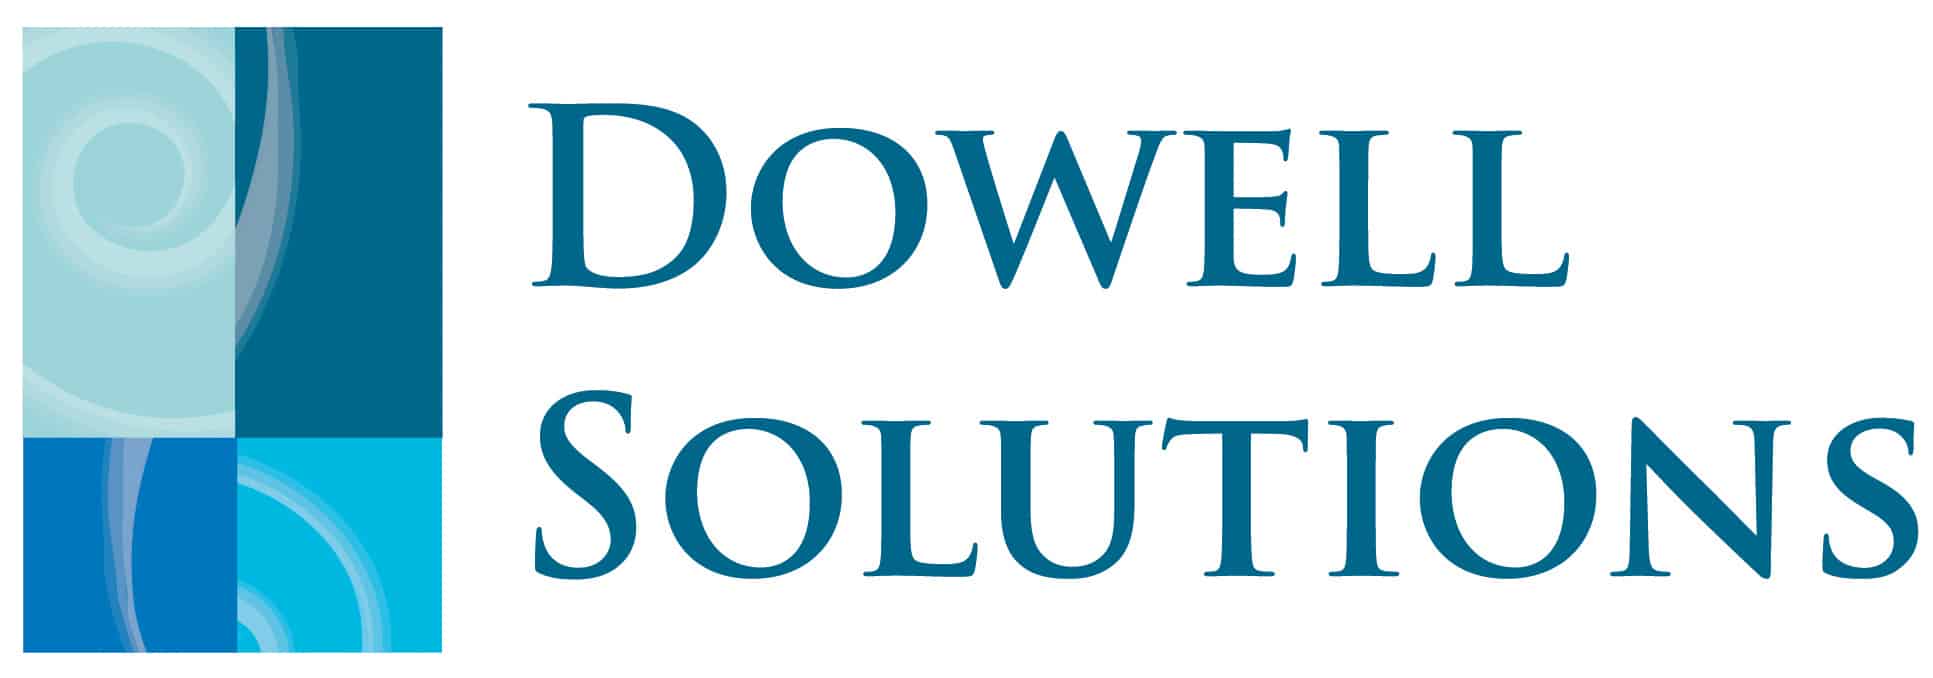 Dowell Solutions | WHS, Risk Management & Human Resources Consultant | Safety & Business Training